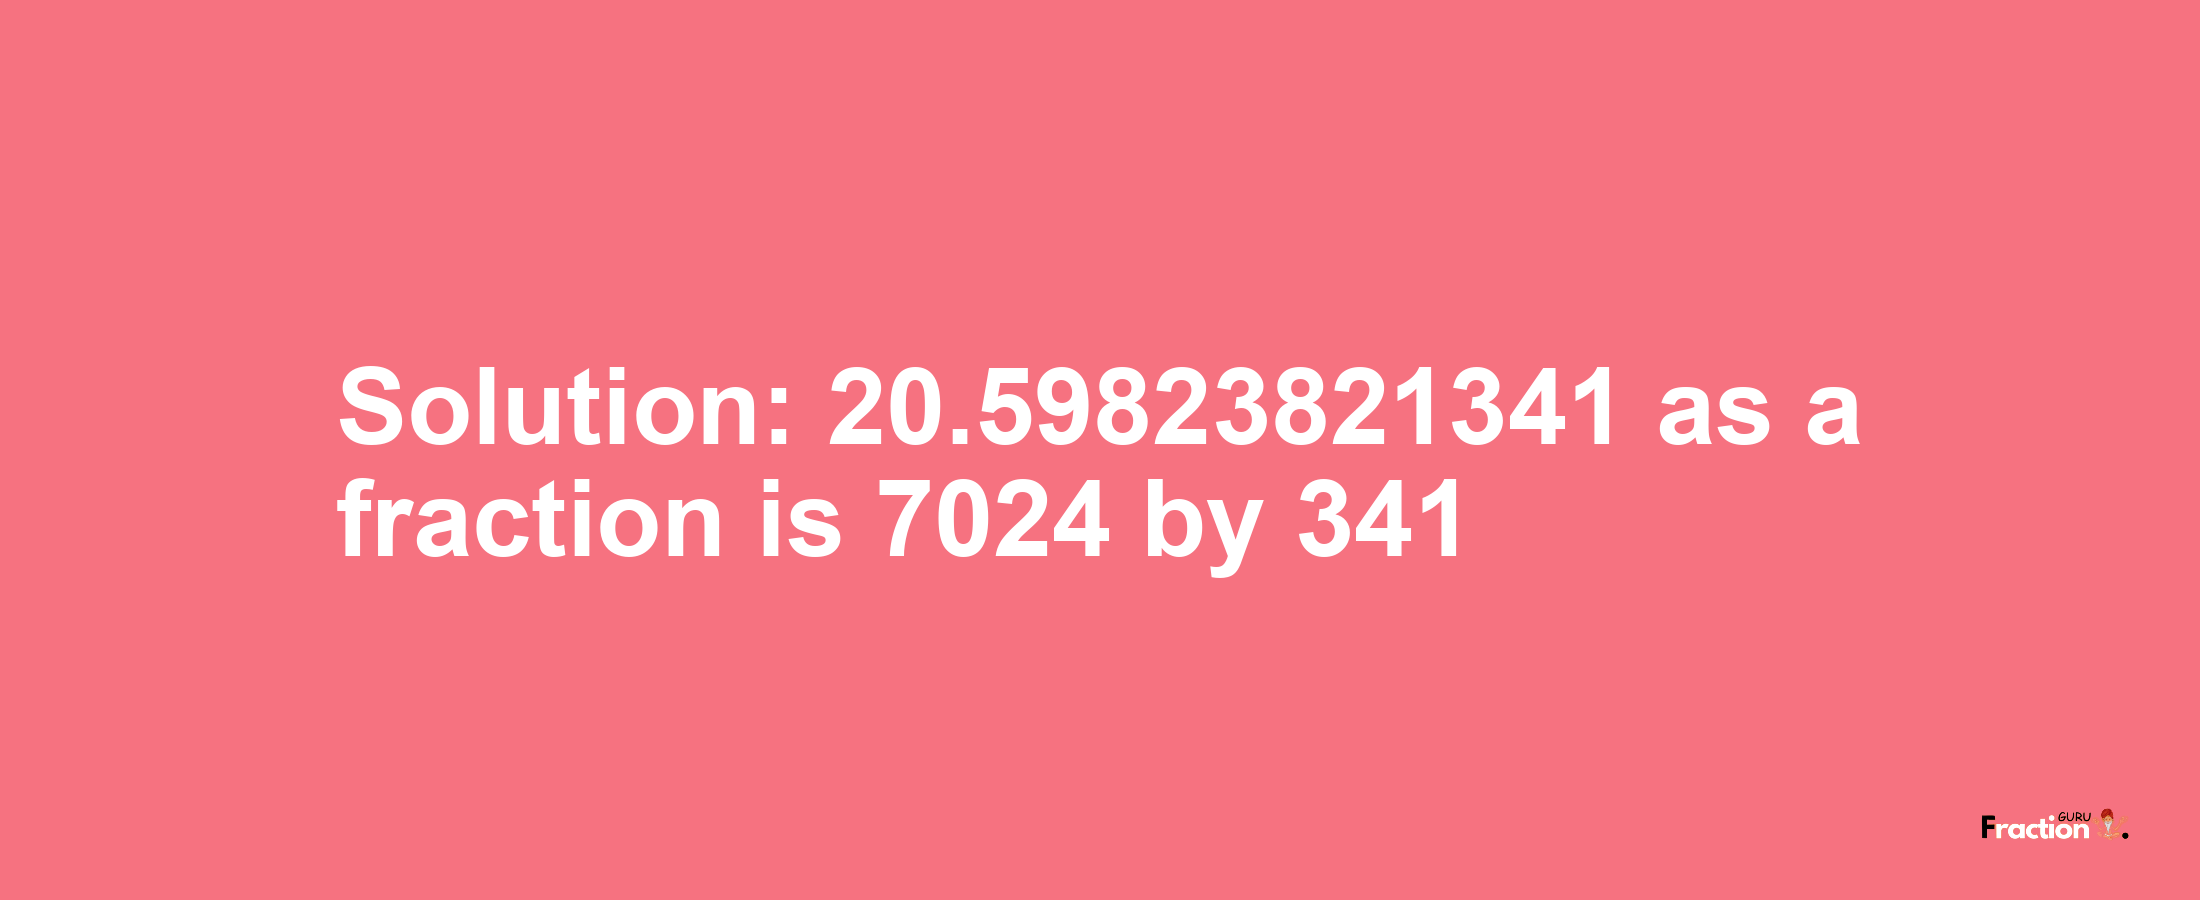 Solution:20.59823821341 as a fraction is 7024/341